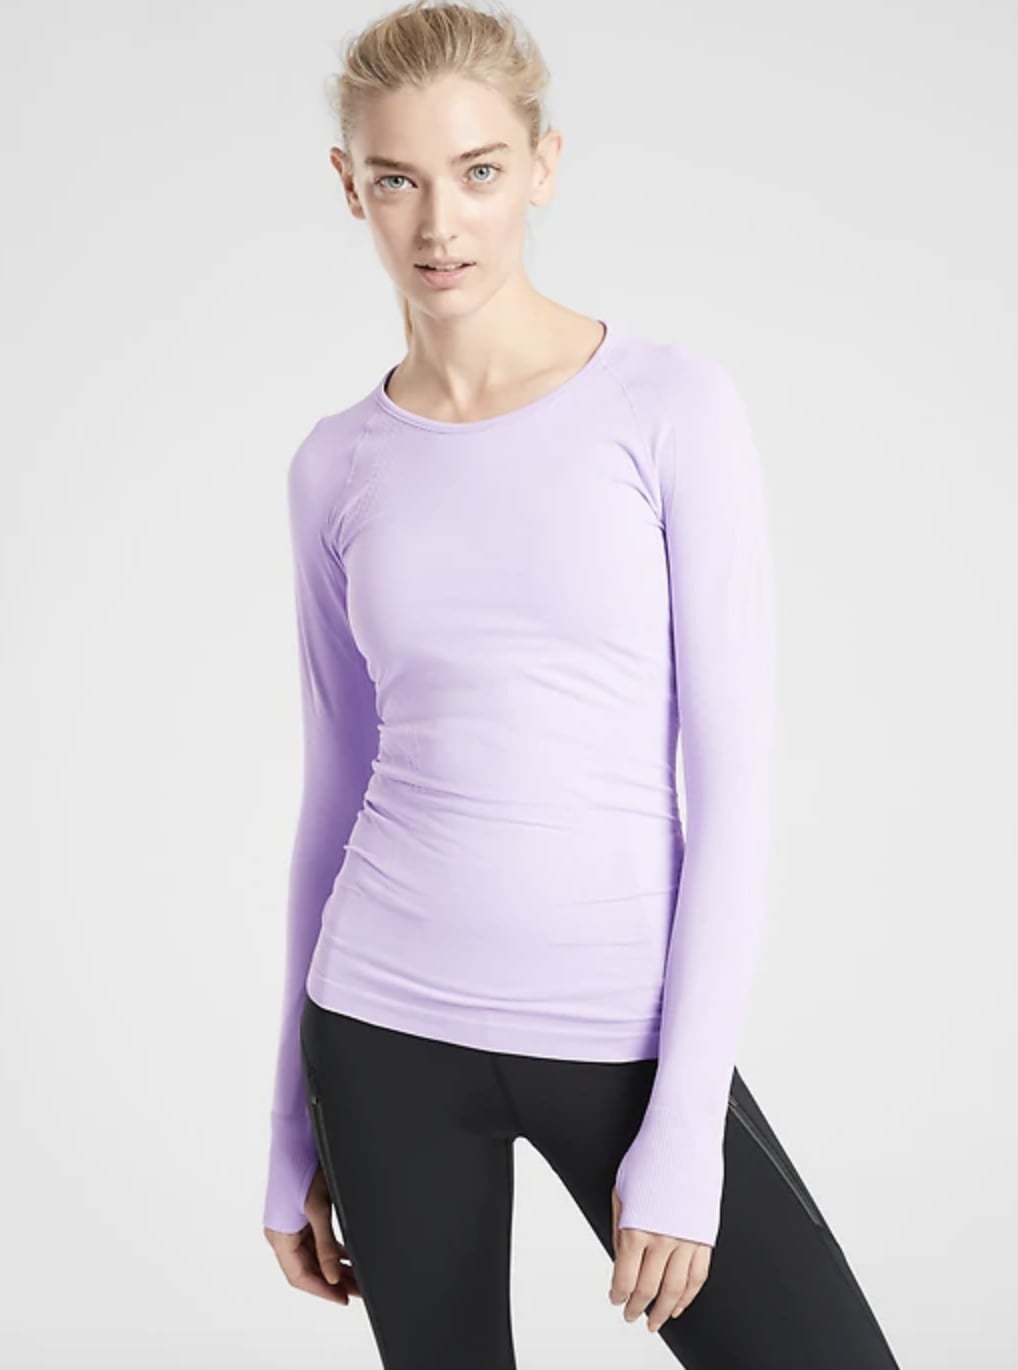 Winter Workout Gifts For the Active Women in Your Life